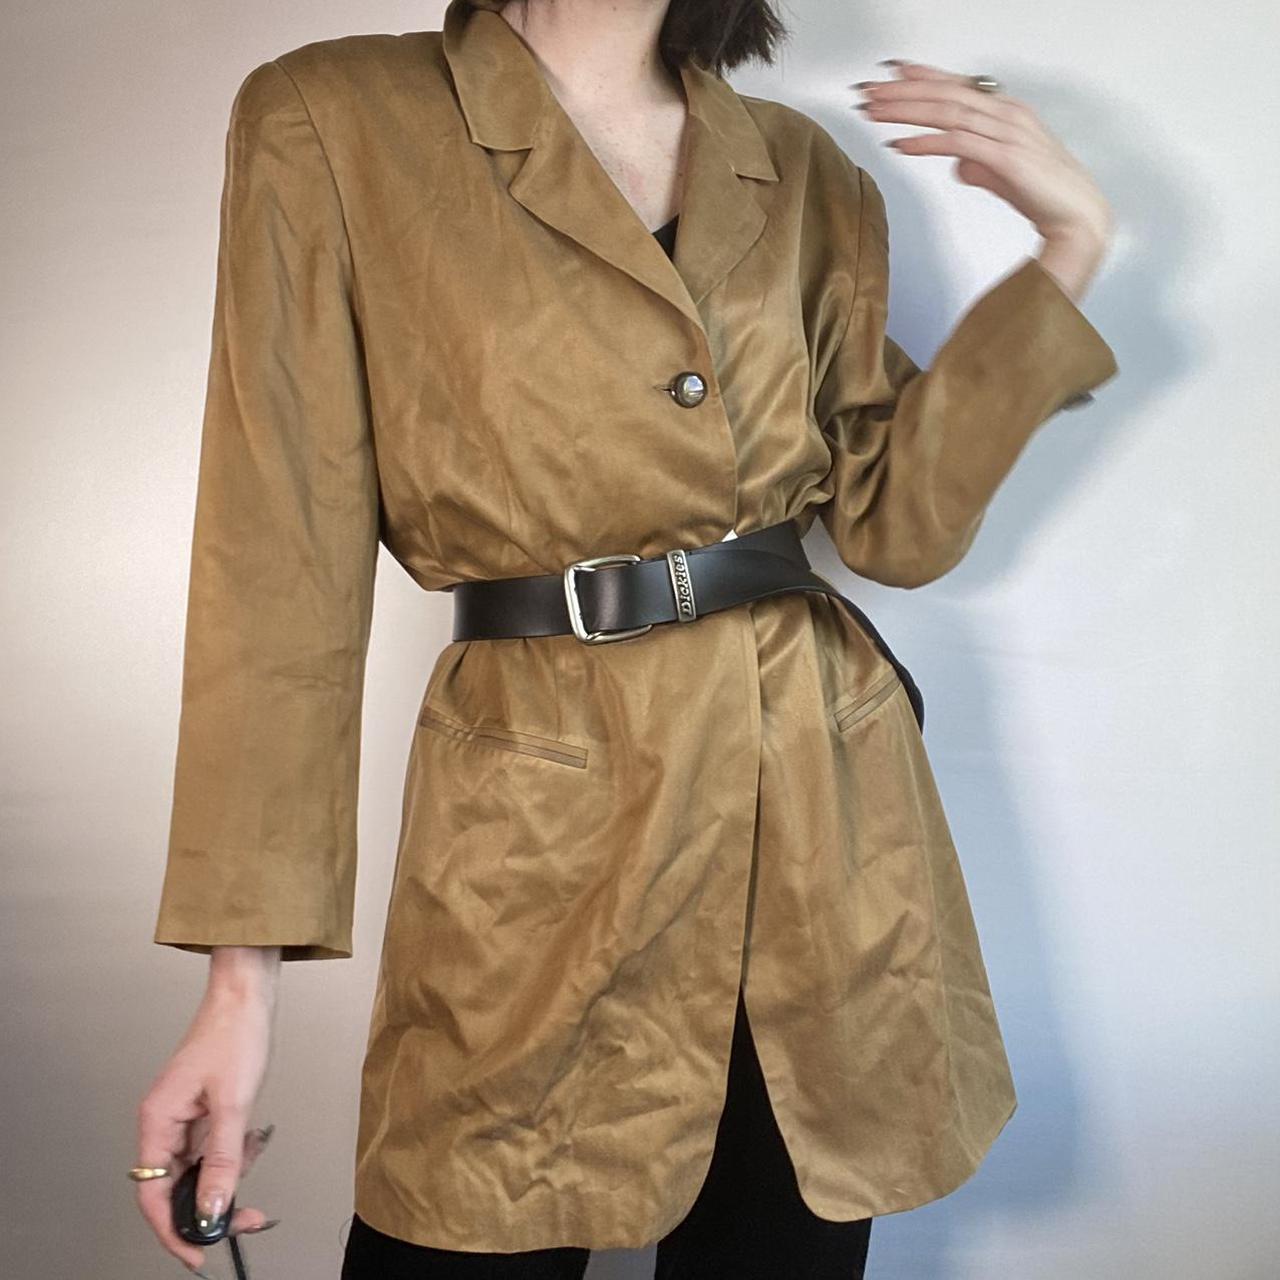 Product Image 1 - vintage Brown Blazer

In excellent condition!